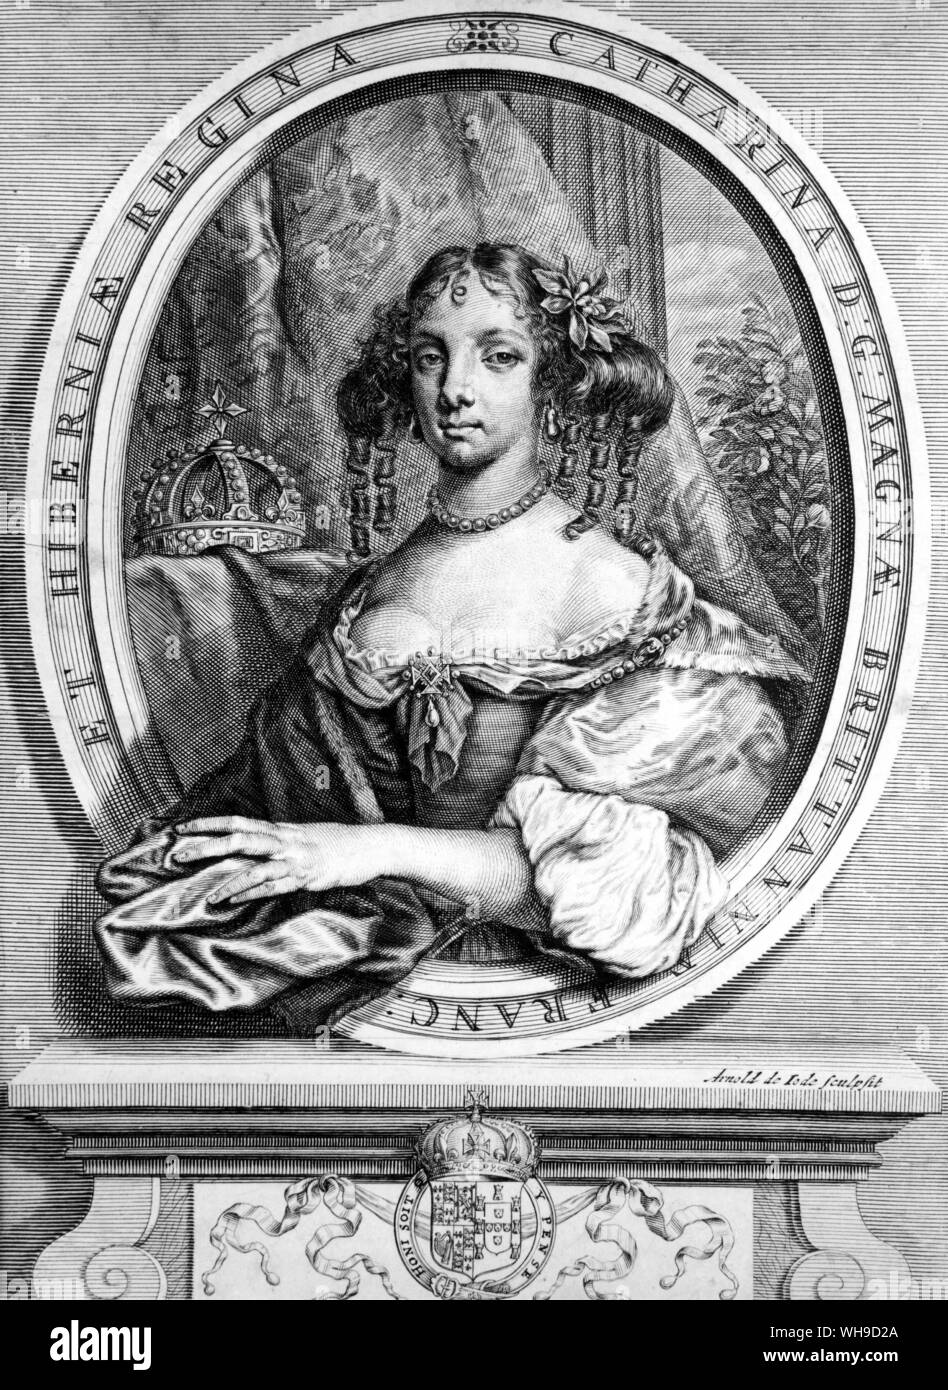 Catherine of Braganza (1638-1705), Queen of Charles II of England from 1662-85. Stock Photo